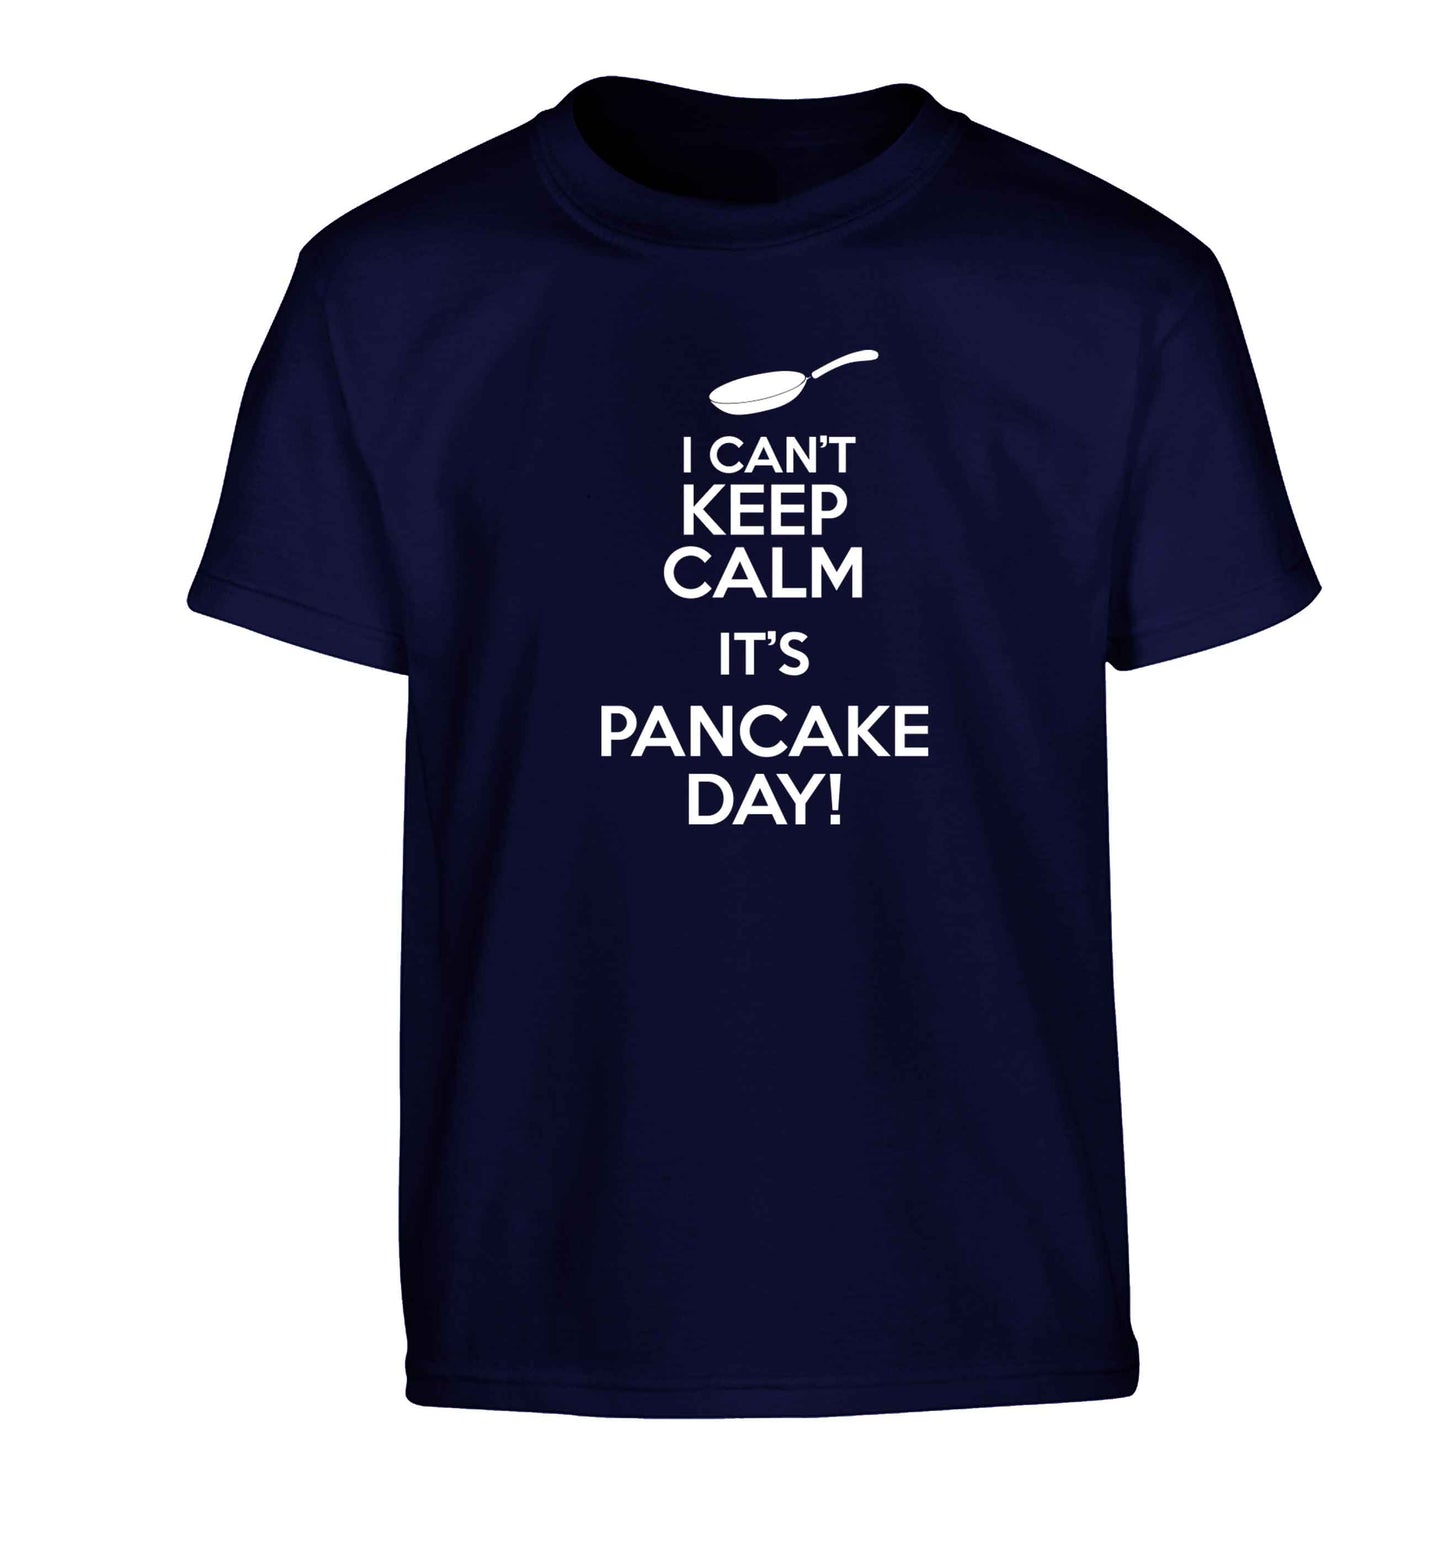 I can't keep calm it's pancake day! Children's navy Tshirt 12-13 Years